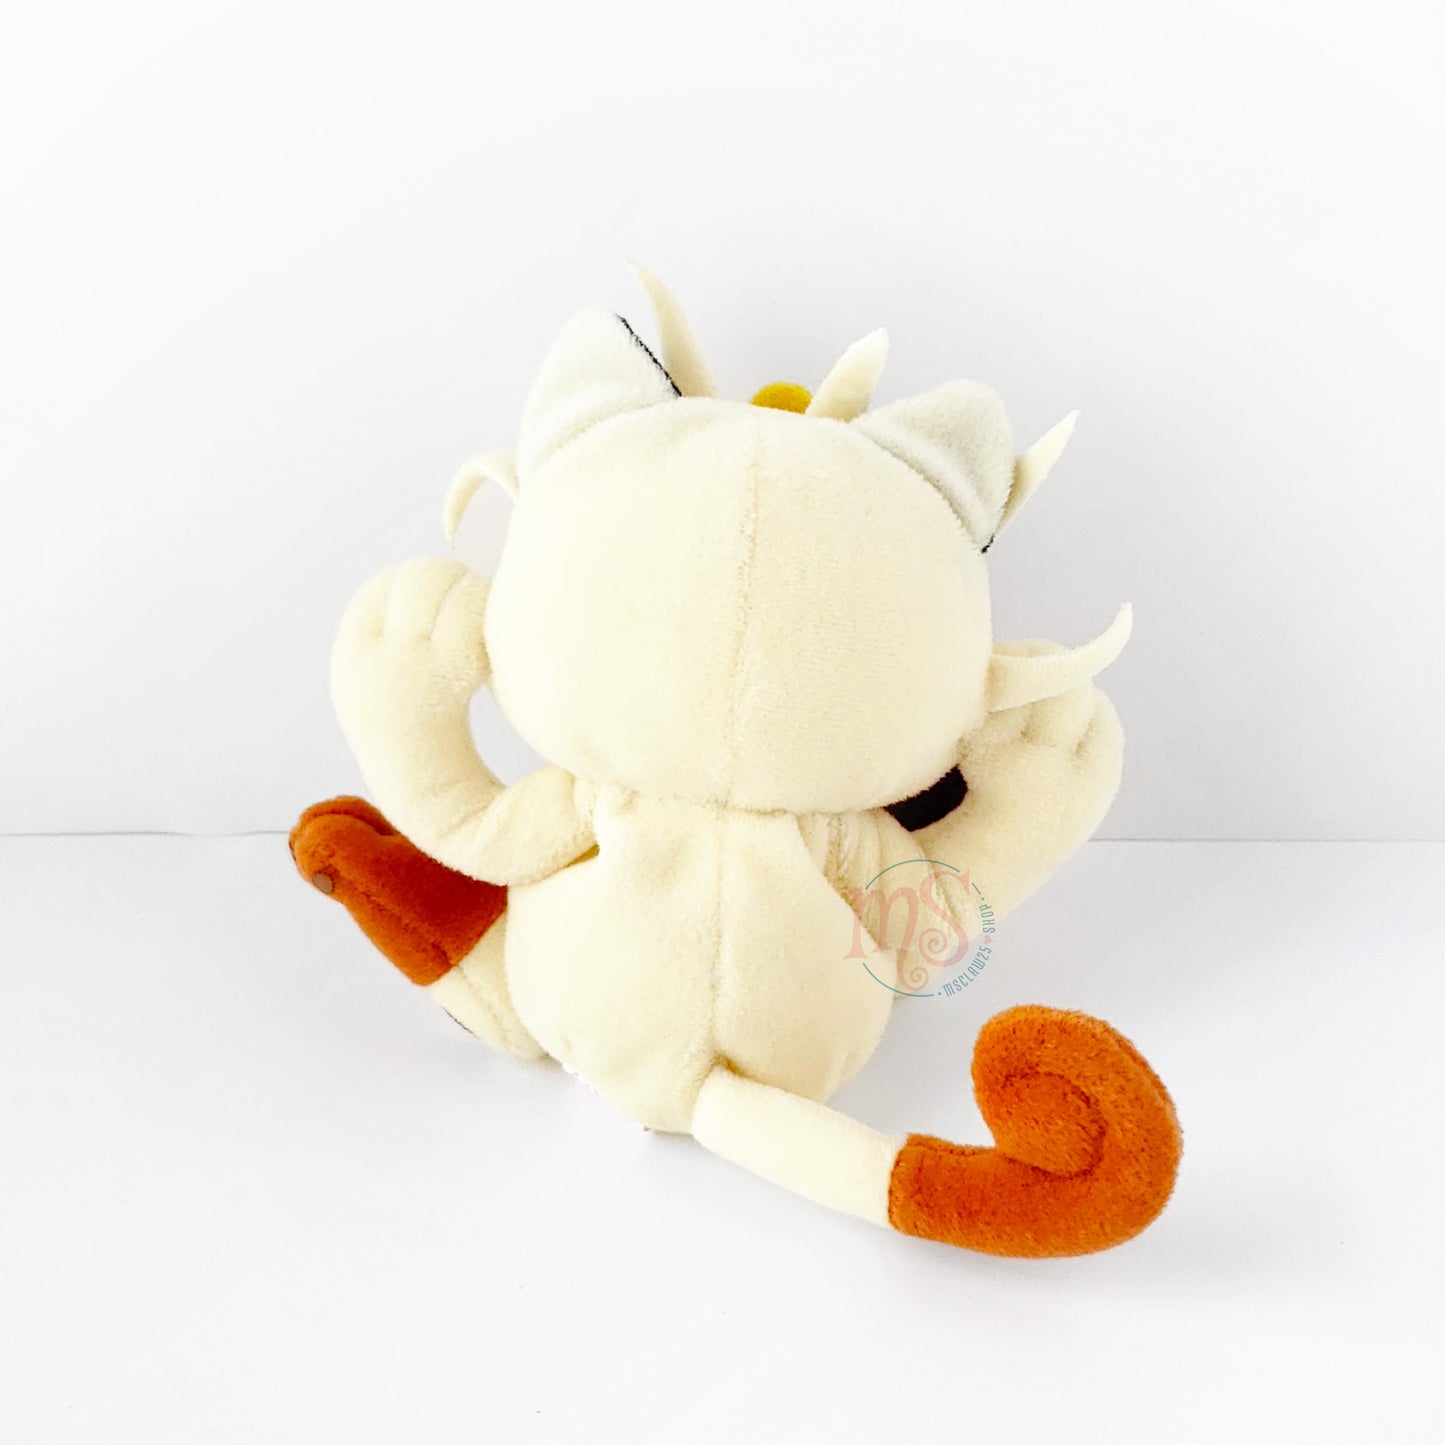 [Vintage] Pokemon | Meowth Small Beanie Plush | 1998 Hong Kong MTR | Limited Edition | HK Exclusive